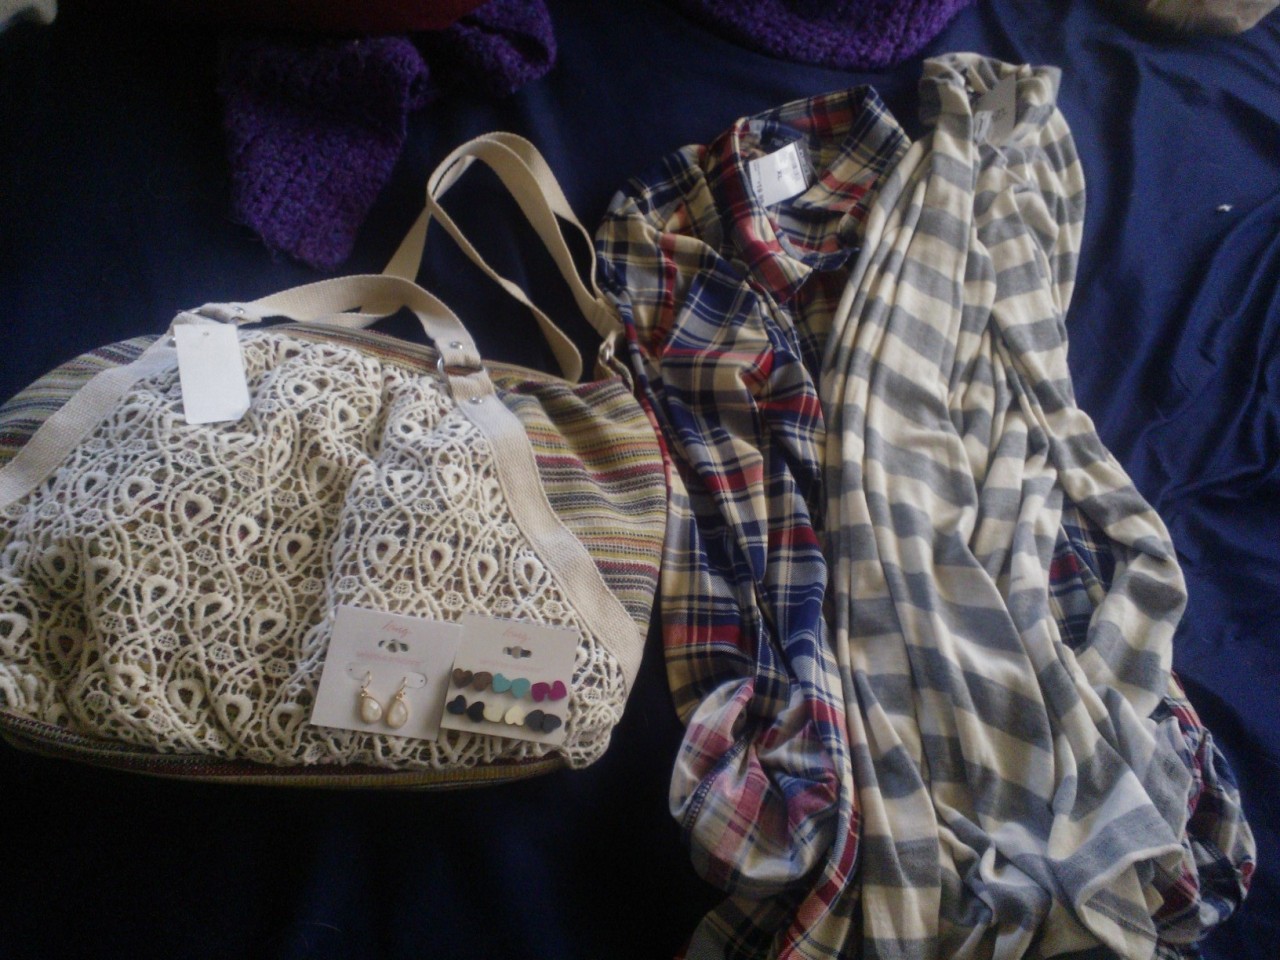 My small haul from Icing and Forever 21.  That bag was 40 dollars but I got it for